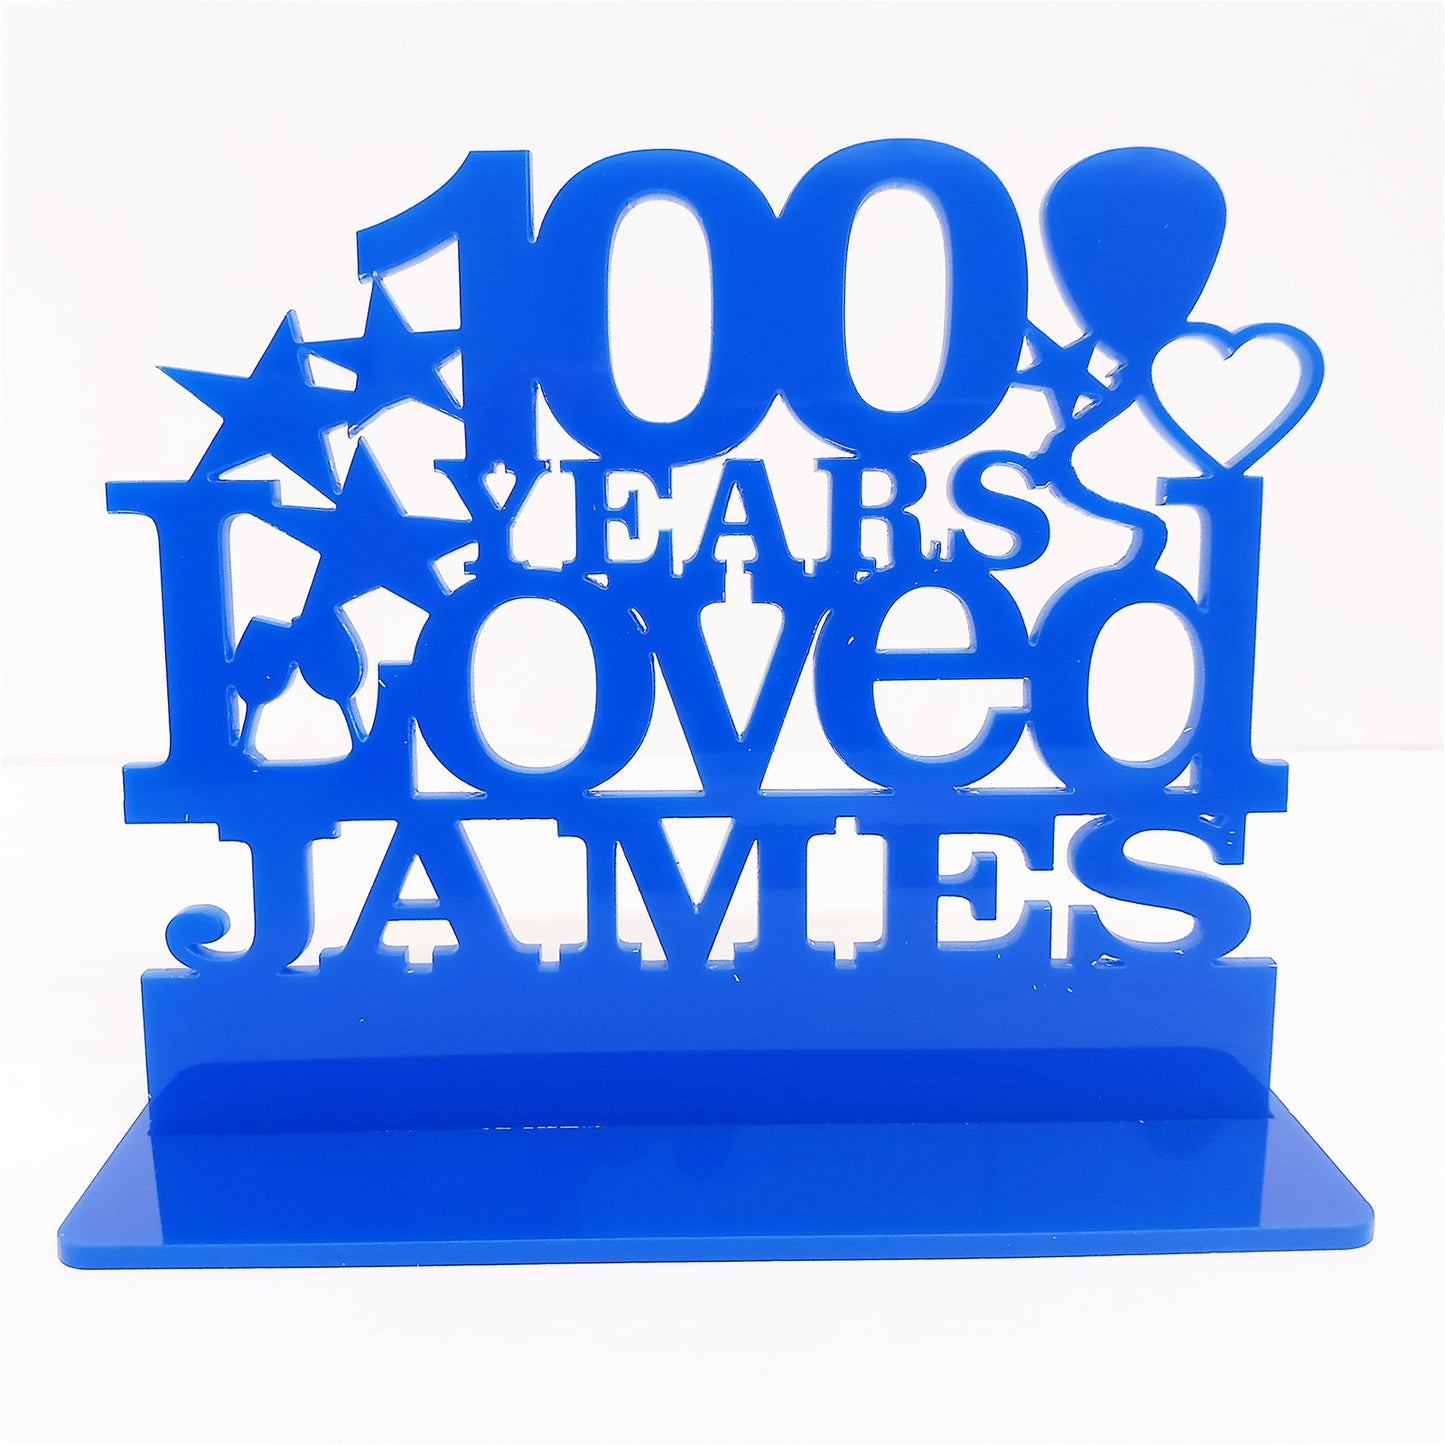 Personalised 100th birthday gift featuring our Years Loved birthday design theme. This present is an acrylic keepsake ornamental plaque.